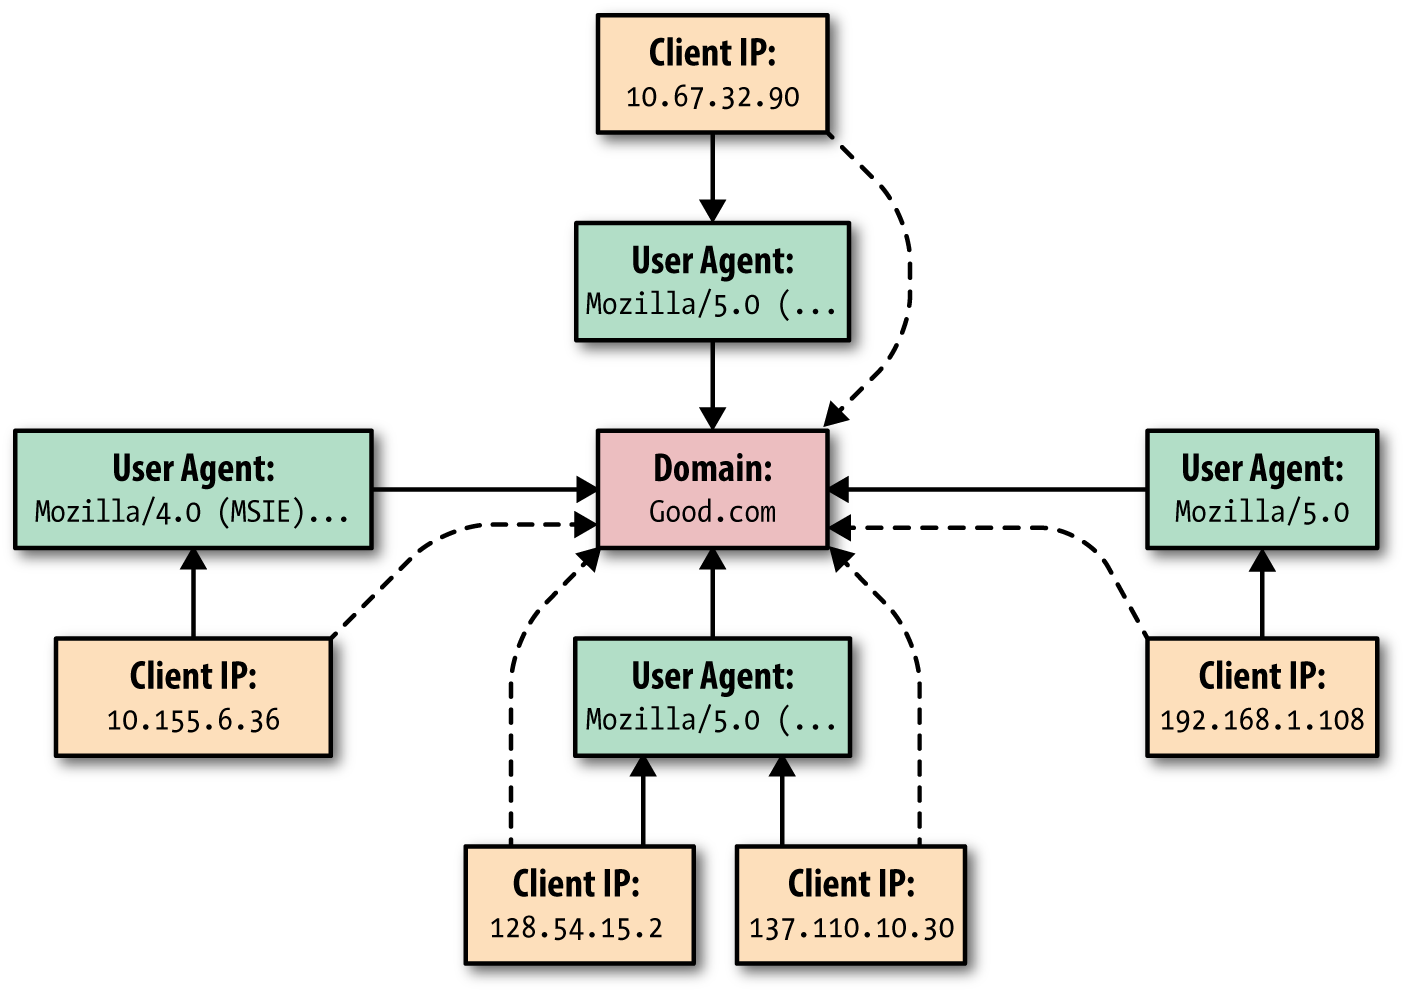 A typical domain doesn’t see a lot of overlap in User-Agent strings across many clients; shown here are five unique clients and four unique User-Agent strings associated with activity to a single domain